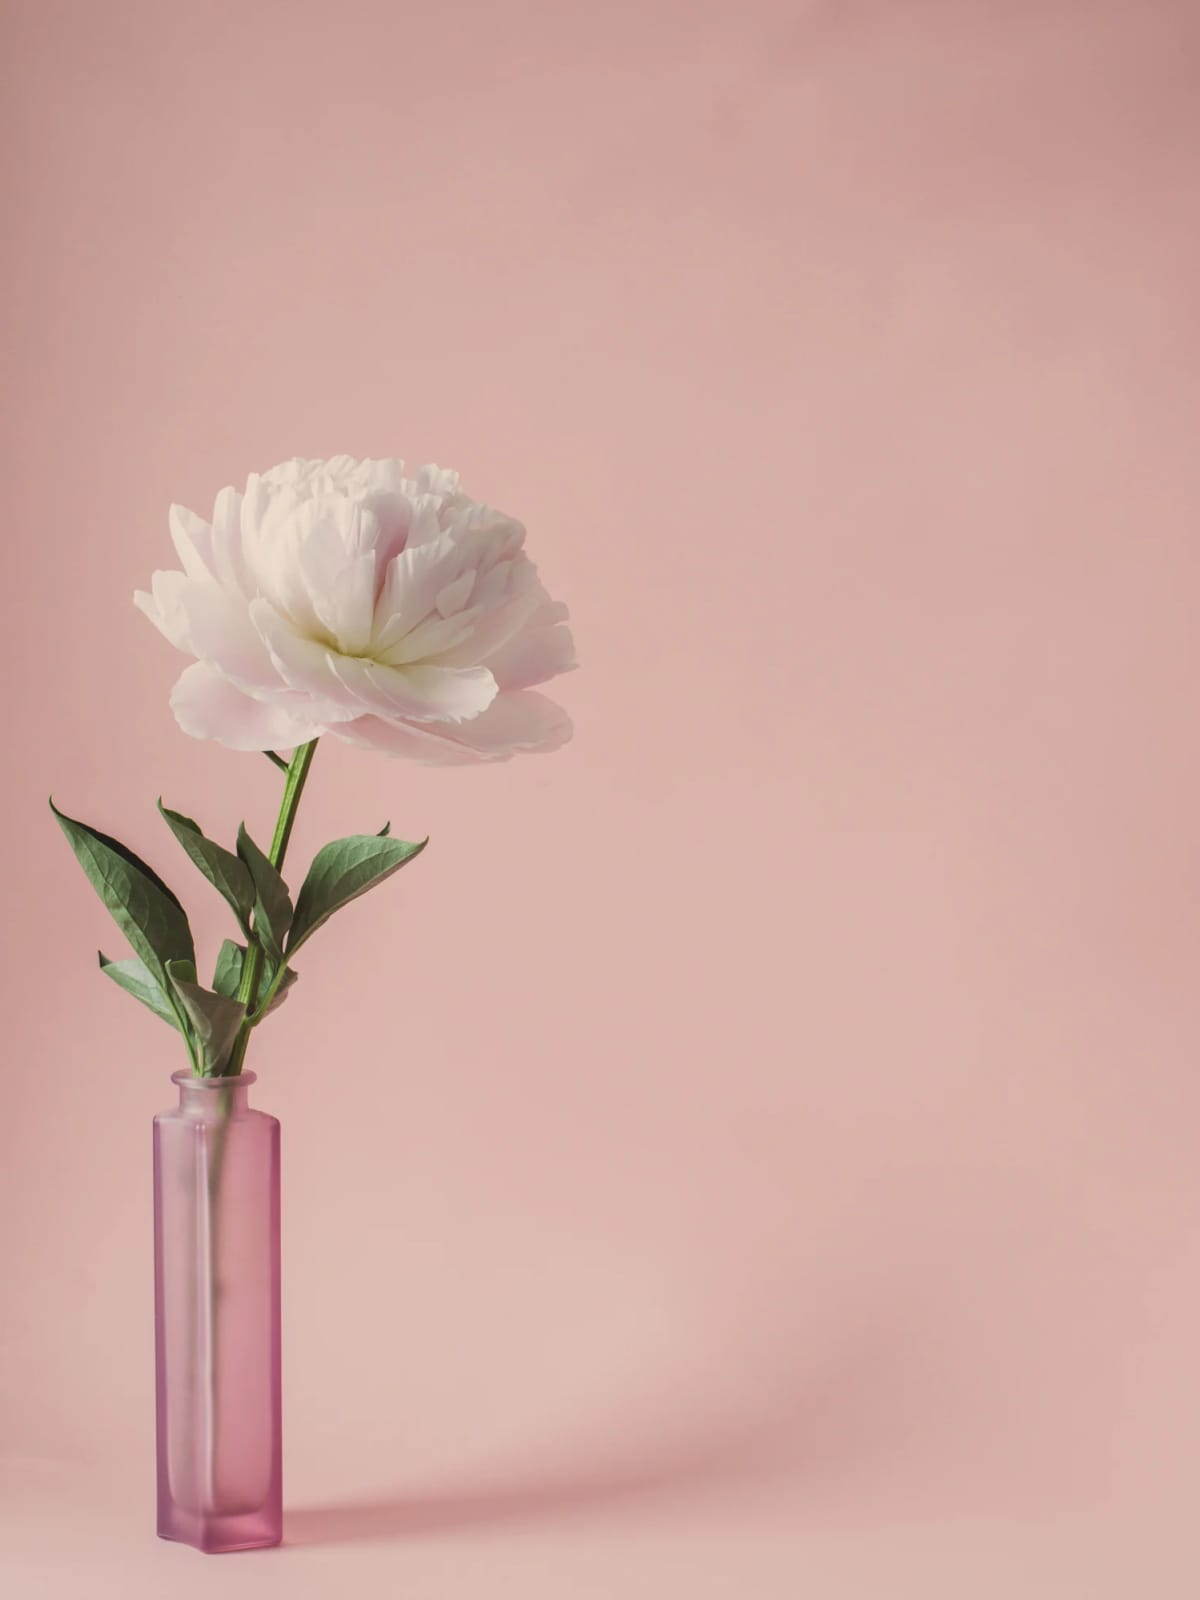 A white peony in a vase